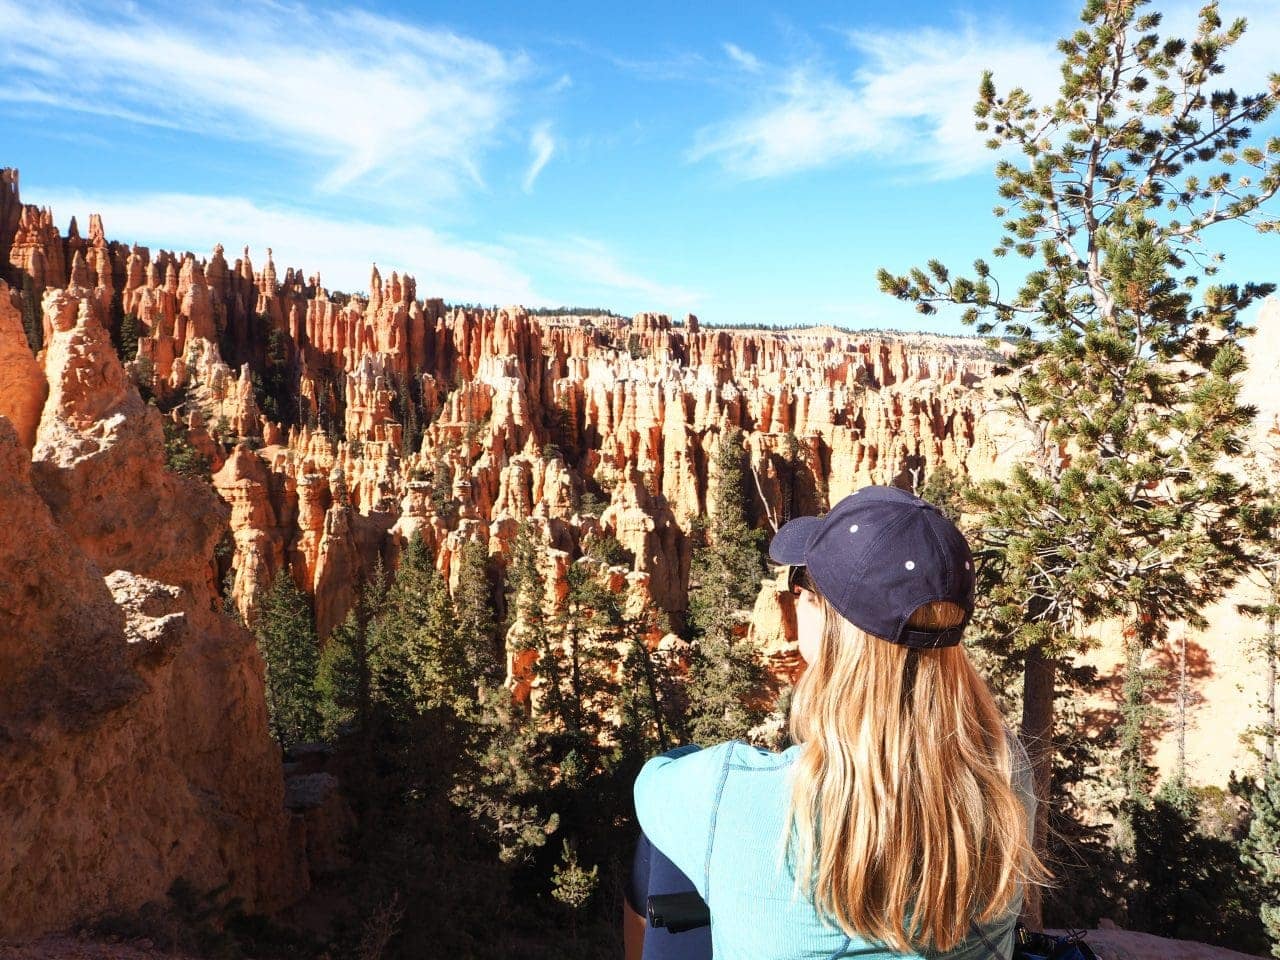 Lindsey stared at the countless hoodoos in the park